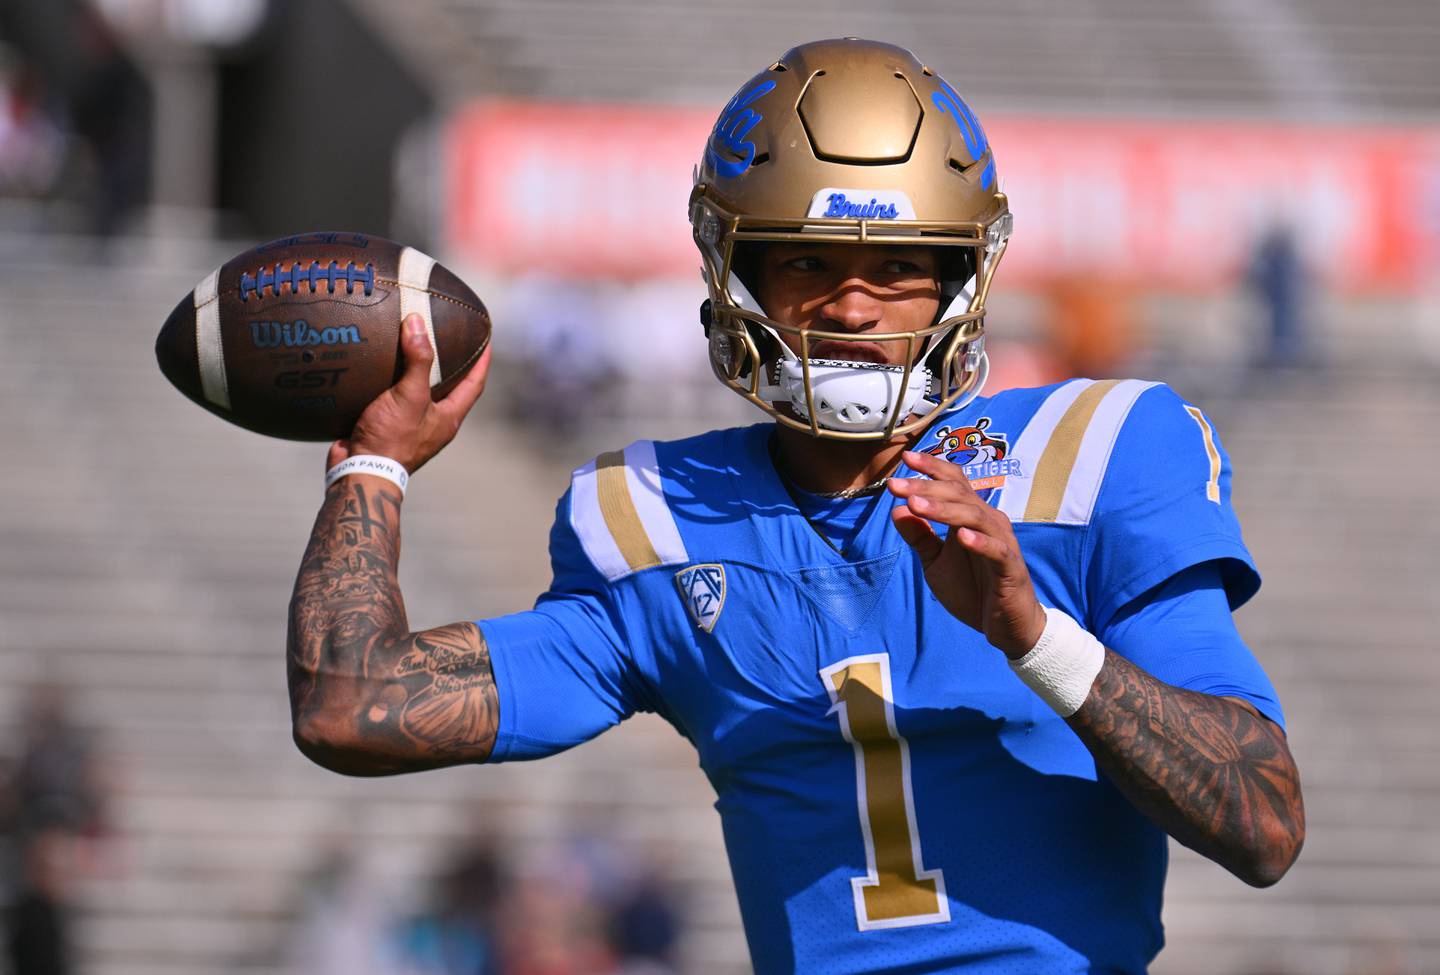 Quarterback Dorian Thompson-Robinson #1 of the UCLA Bruins warms up before his team's game against the Pittsburgh Panthers in the Tony the Tiger Sun Bowl game at Sun Bowl Stadium on December 30, 2022 in El Paso, Texas.